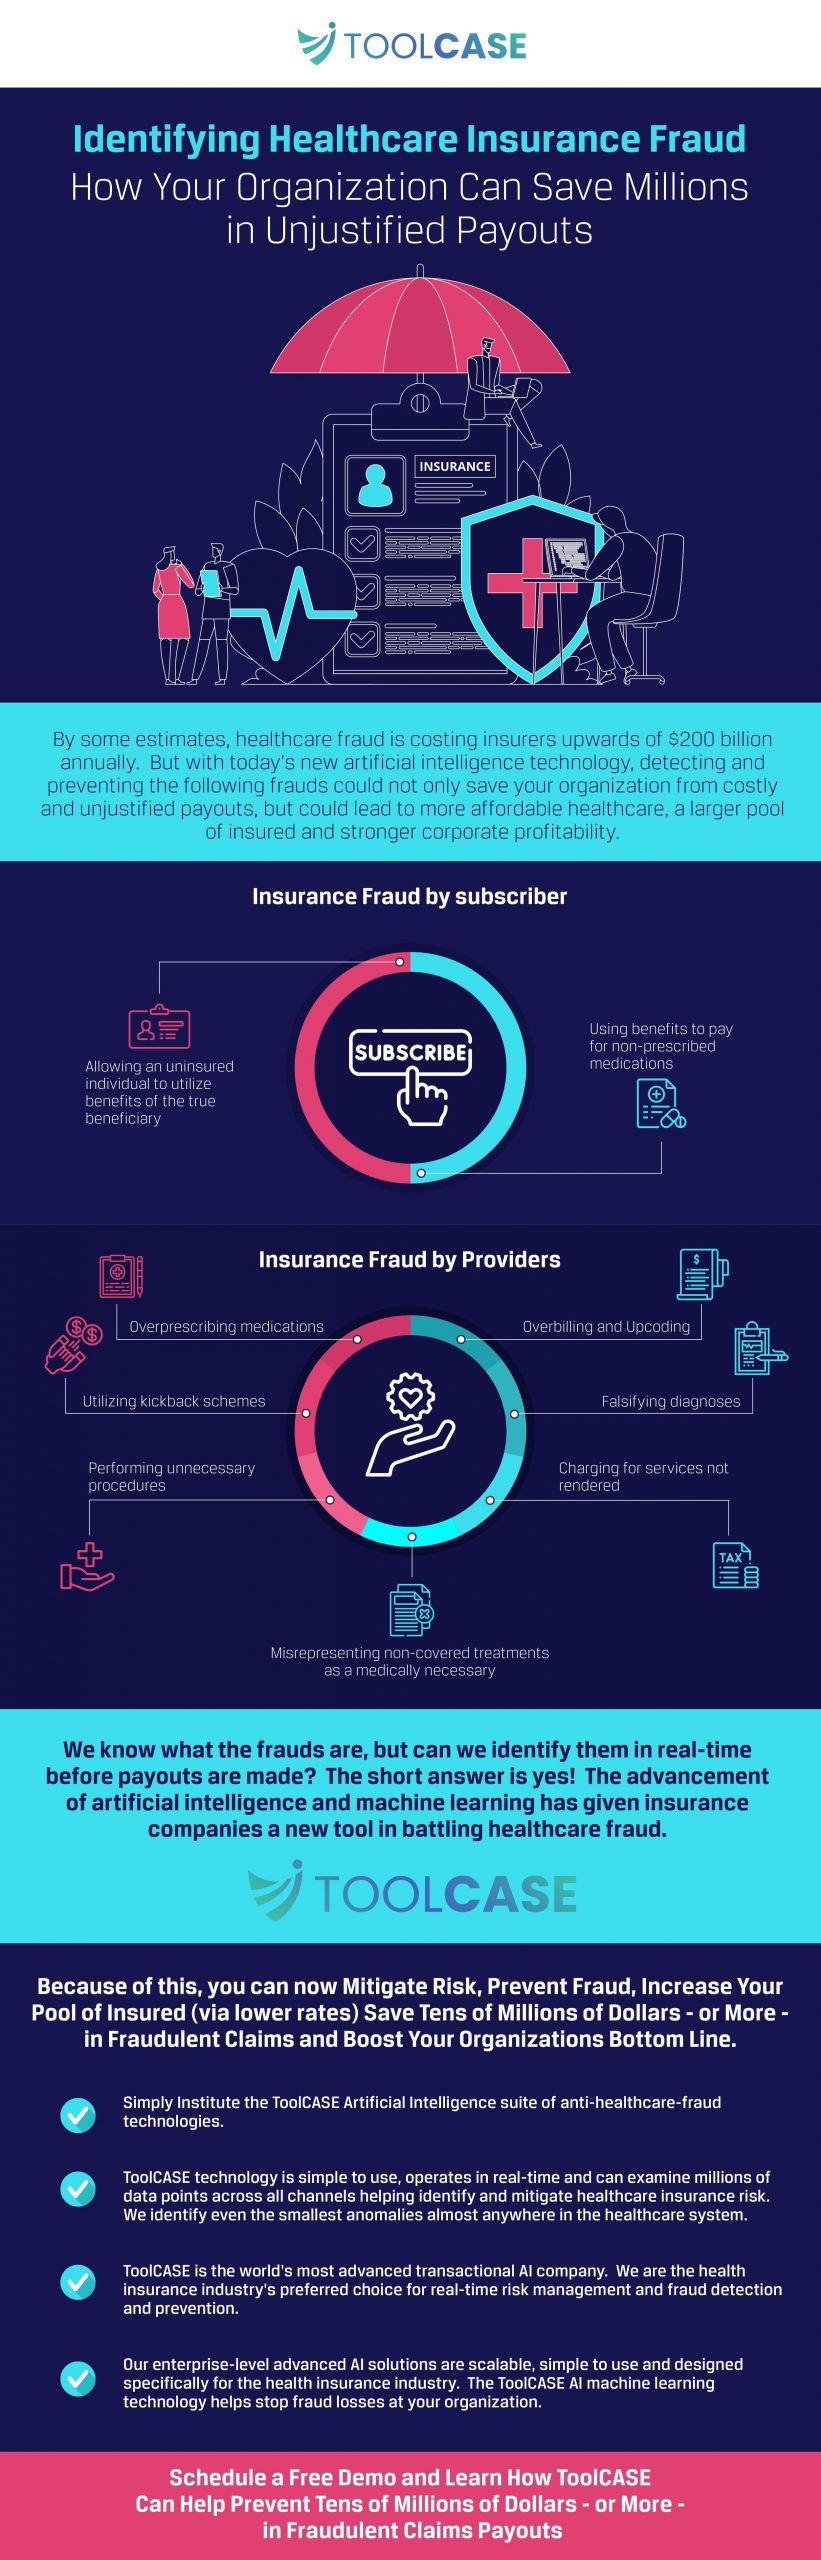 Identifying Healthcare Insurance Fraud How Your Organization Can Save Millions in Unjustified Payouts